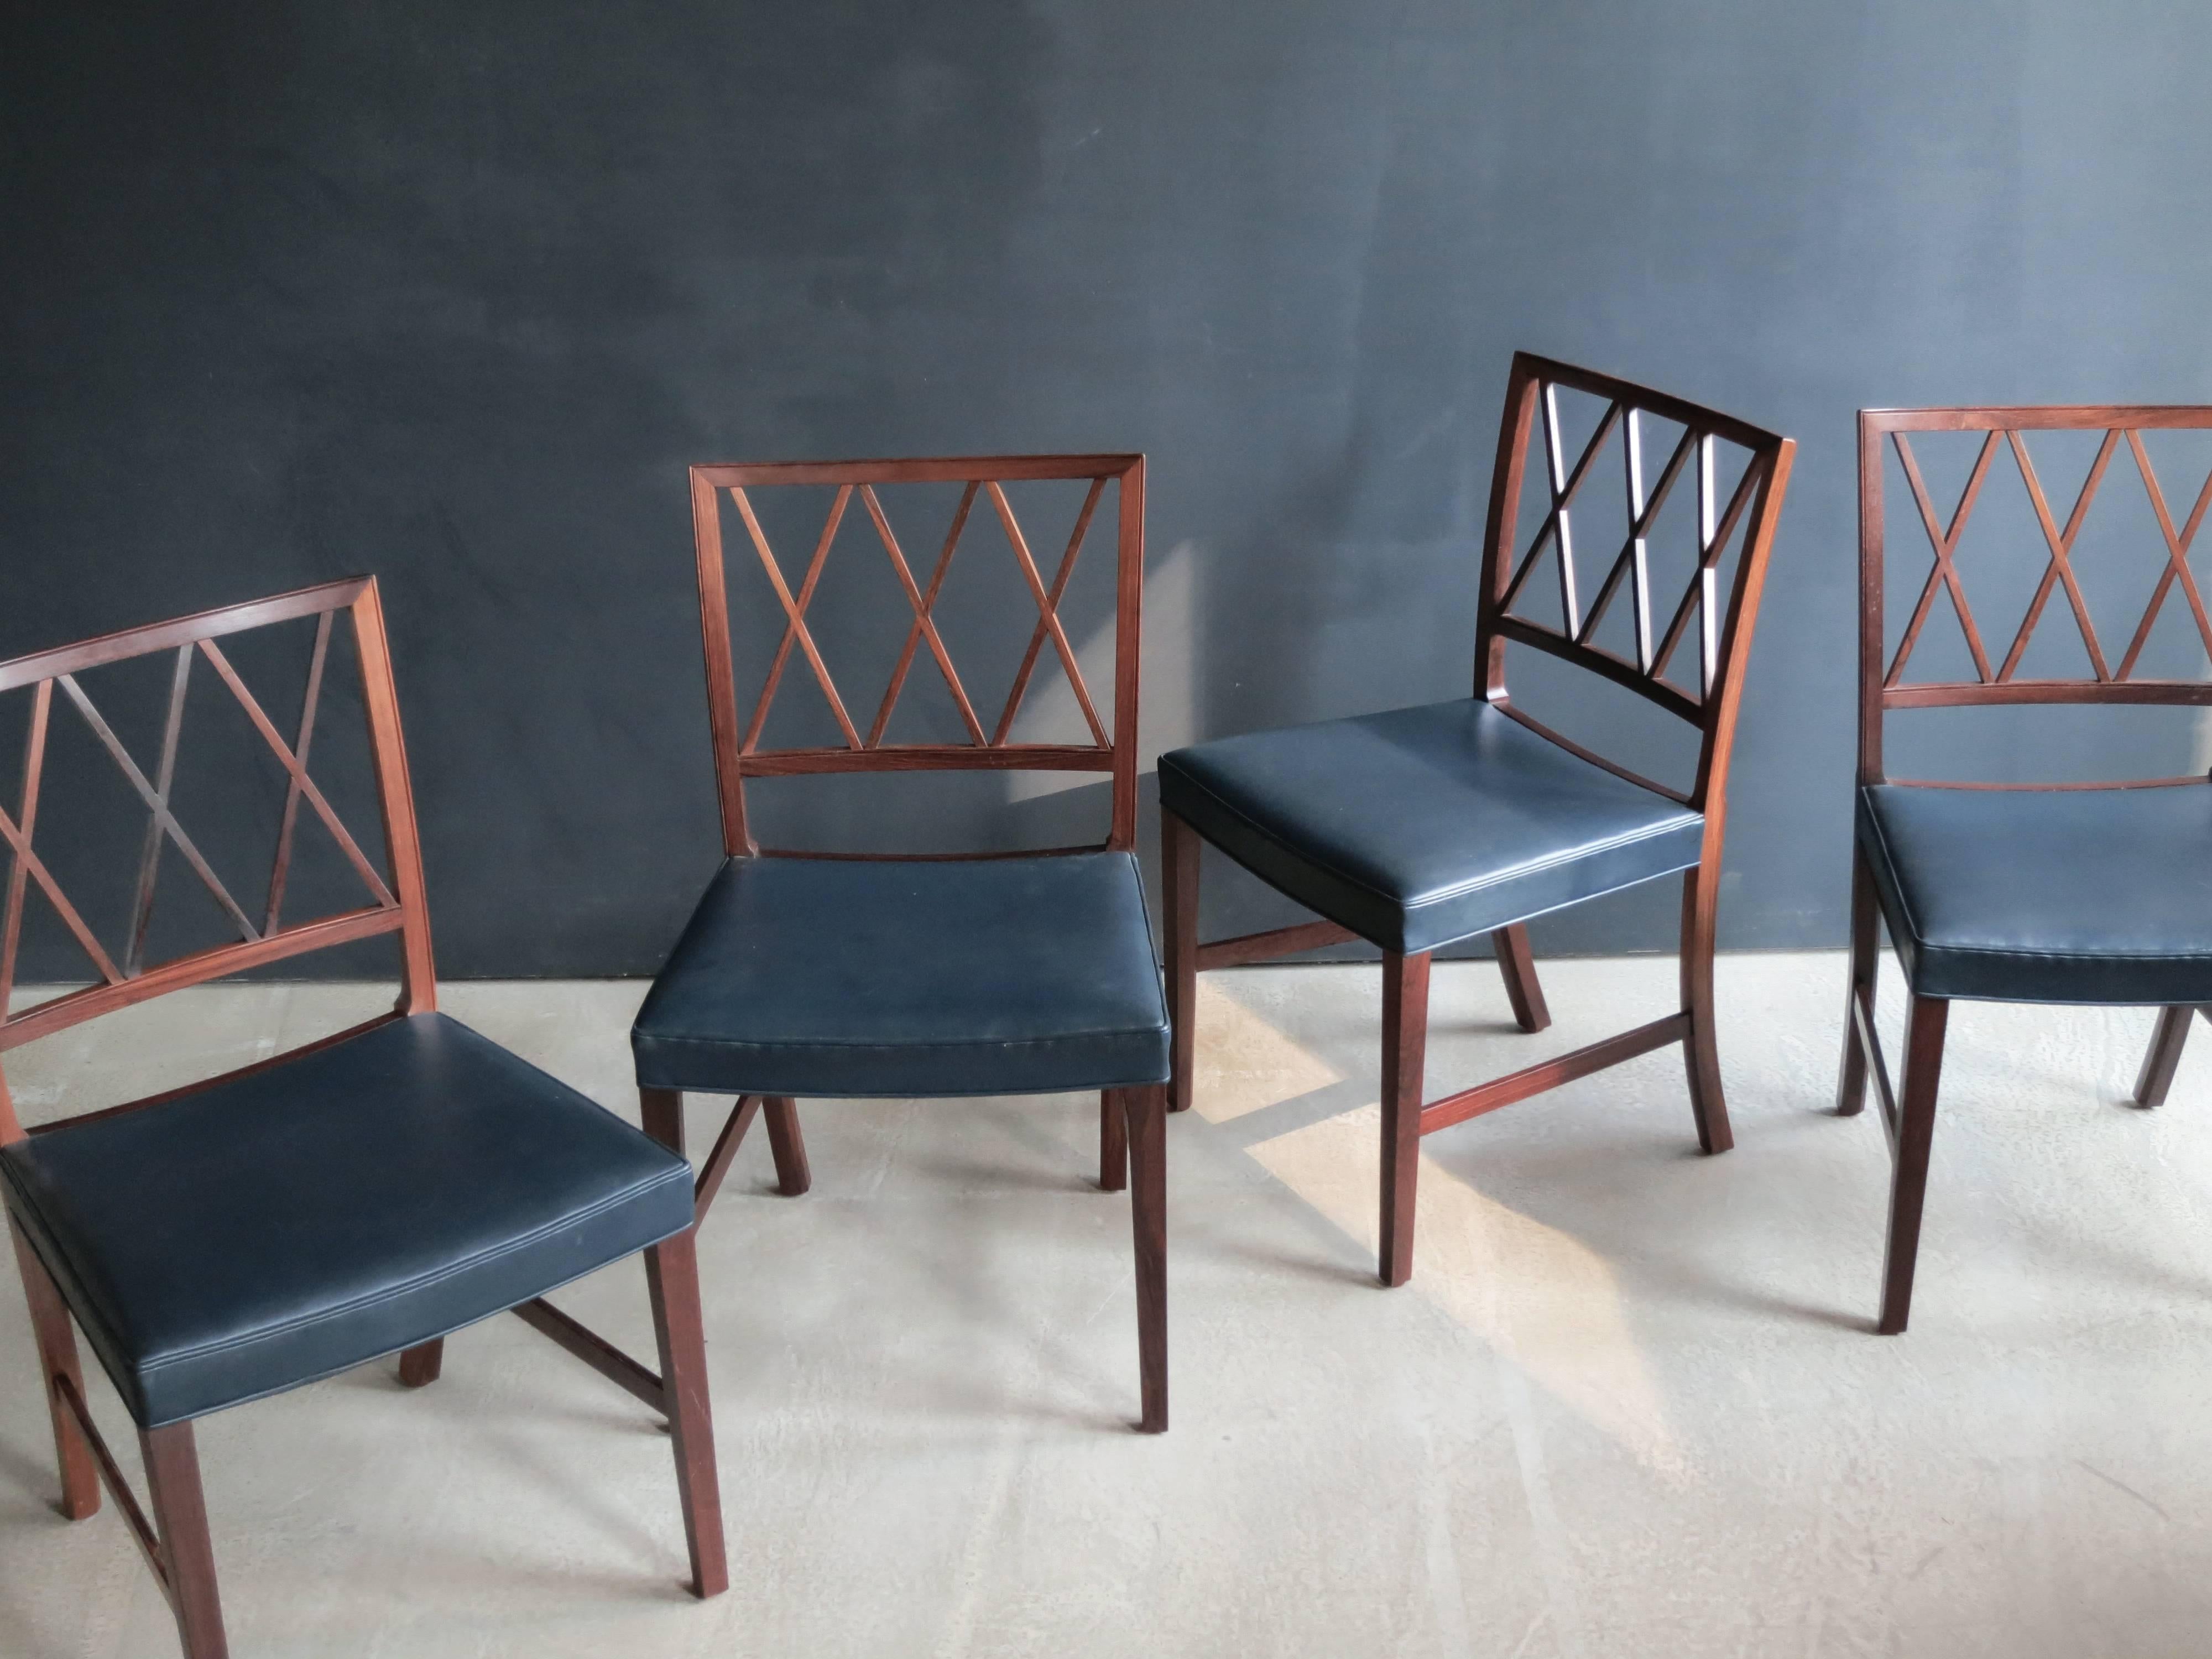 This large group of twelve matching cross-backed dining chairs appears light and airy due to the three molded X-forms across the back of each chair. The well proportioned seat and pitch of the back make this a very comfortable chair for long